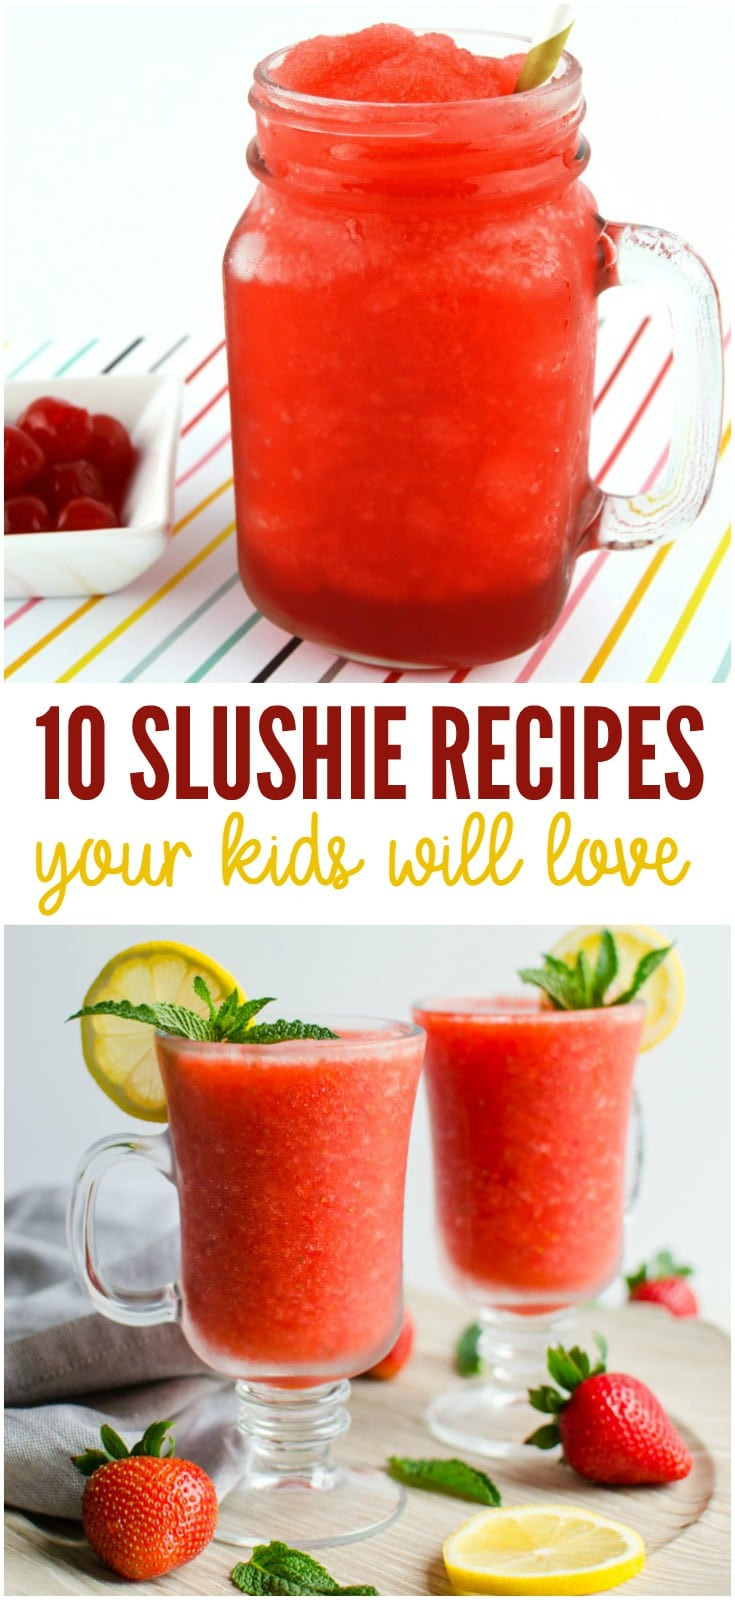 Cool Recipes For Kids
 10 Yummy Slushie Recipes for Kids Cold Drinks to Keep